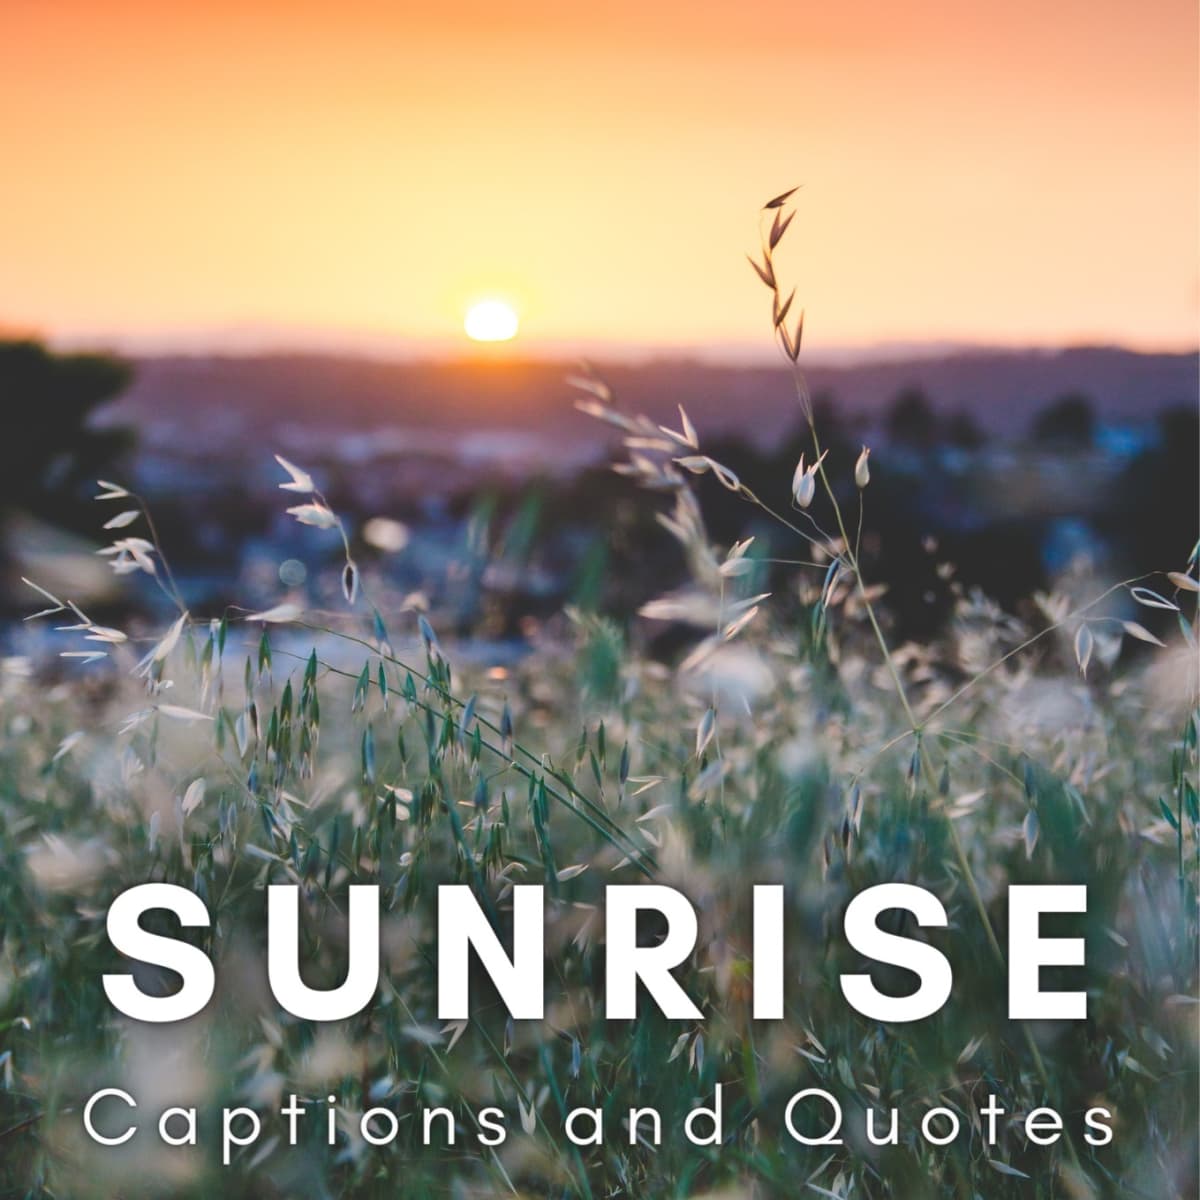 beautiful sunrise scenery with quotes